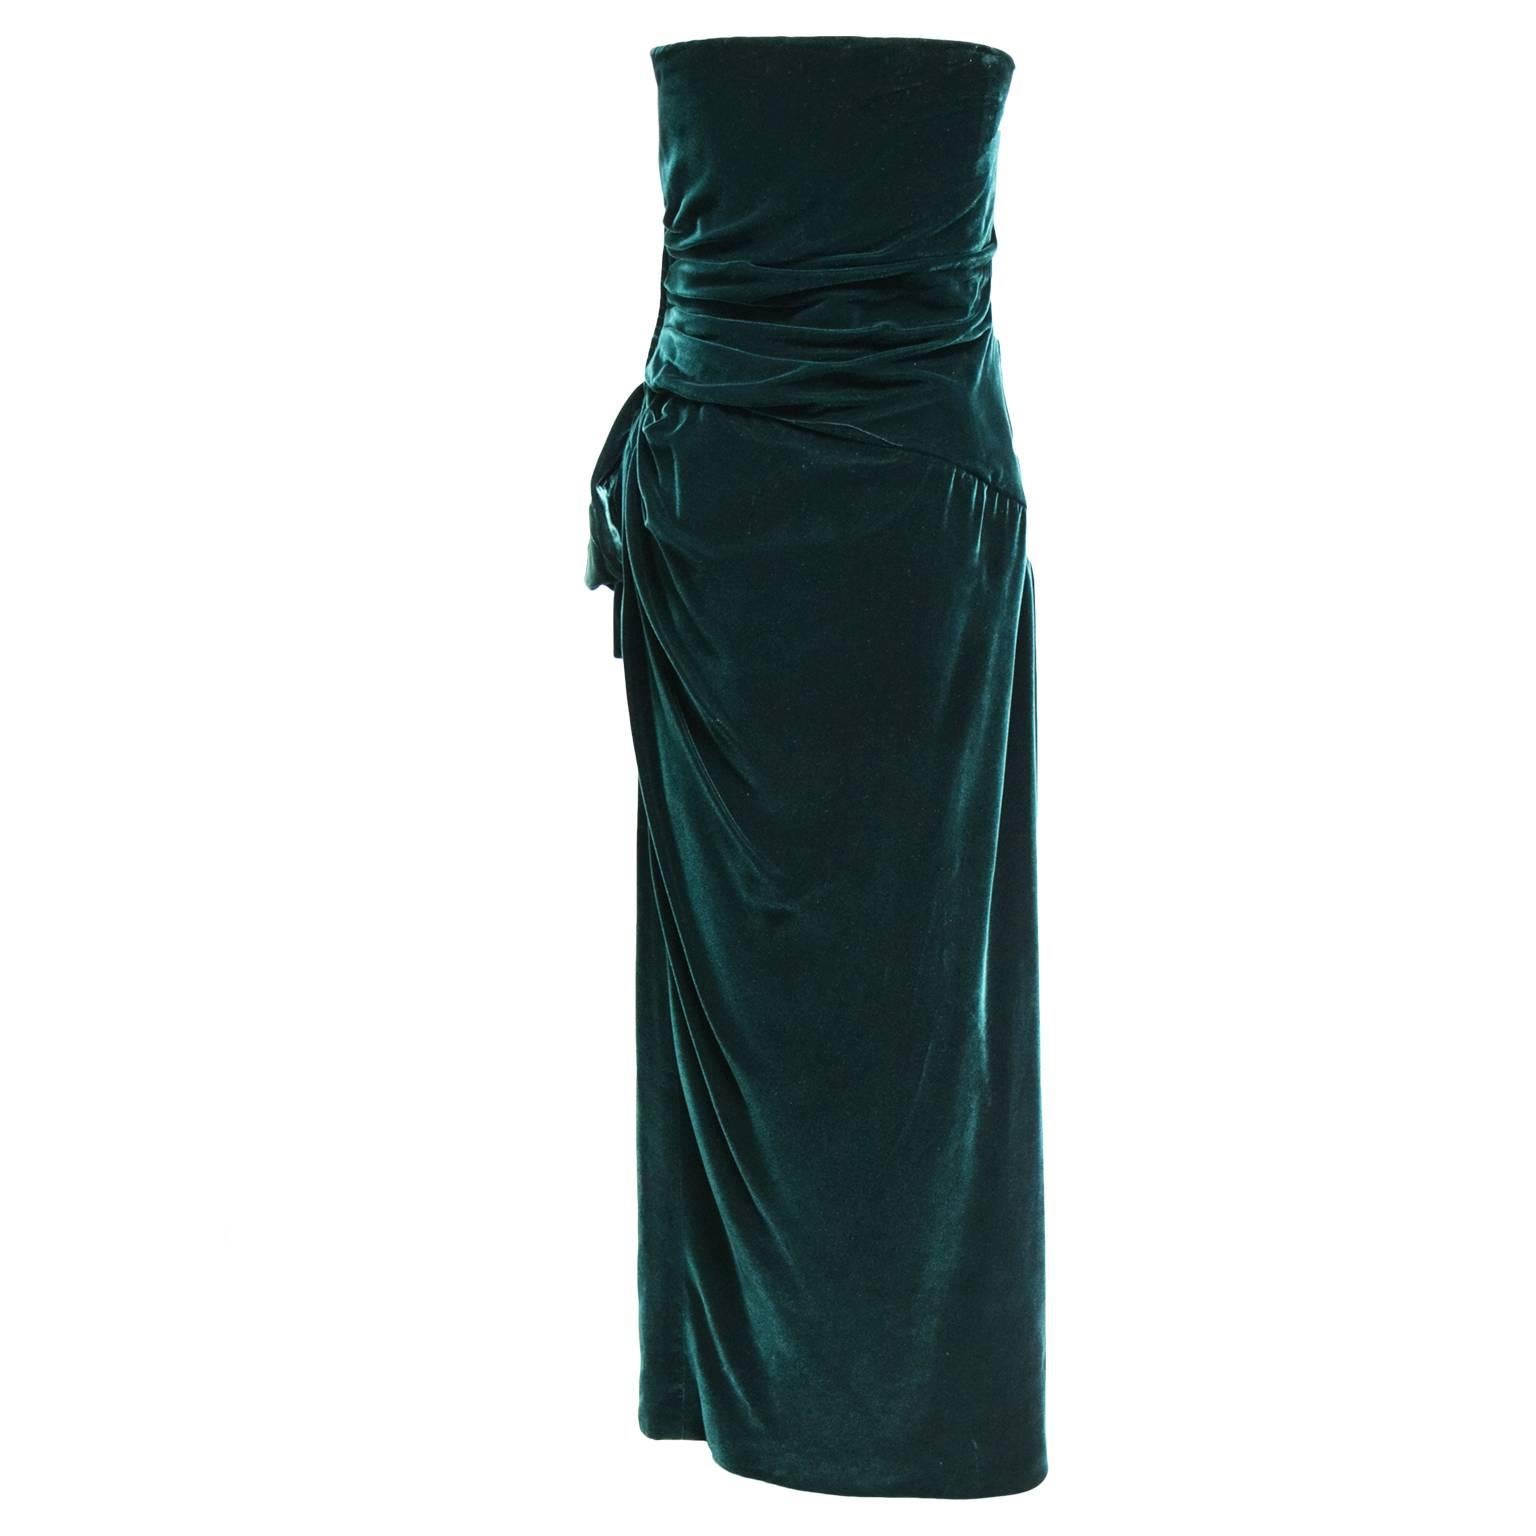 This beautiful dress by Victor Costa is made of a beautiful emerald green velvet which is perfect for any holiday event coming up this year. The bodice is gathered creating a draped look and the front of the dress has a side sash embellishment.  